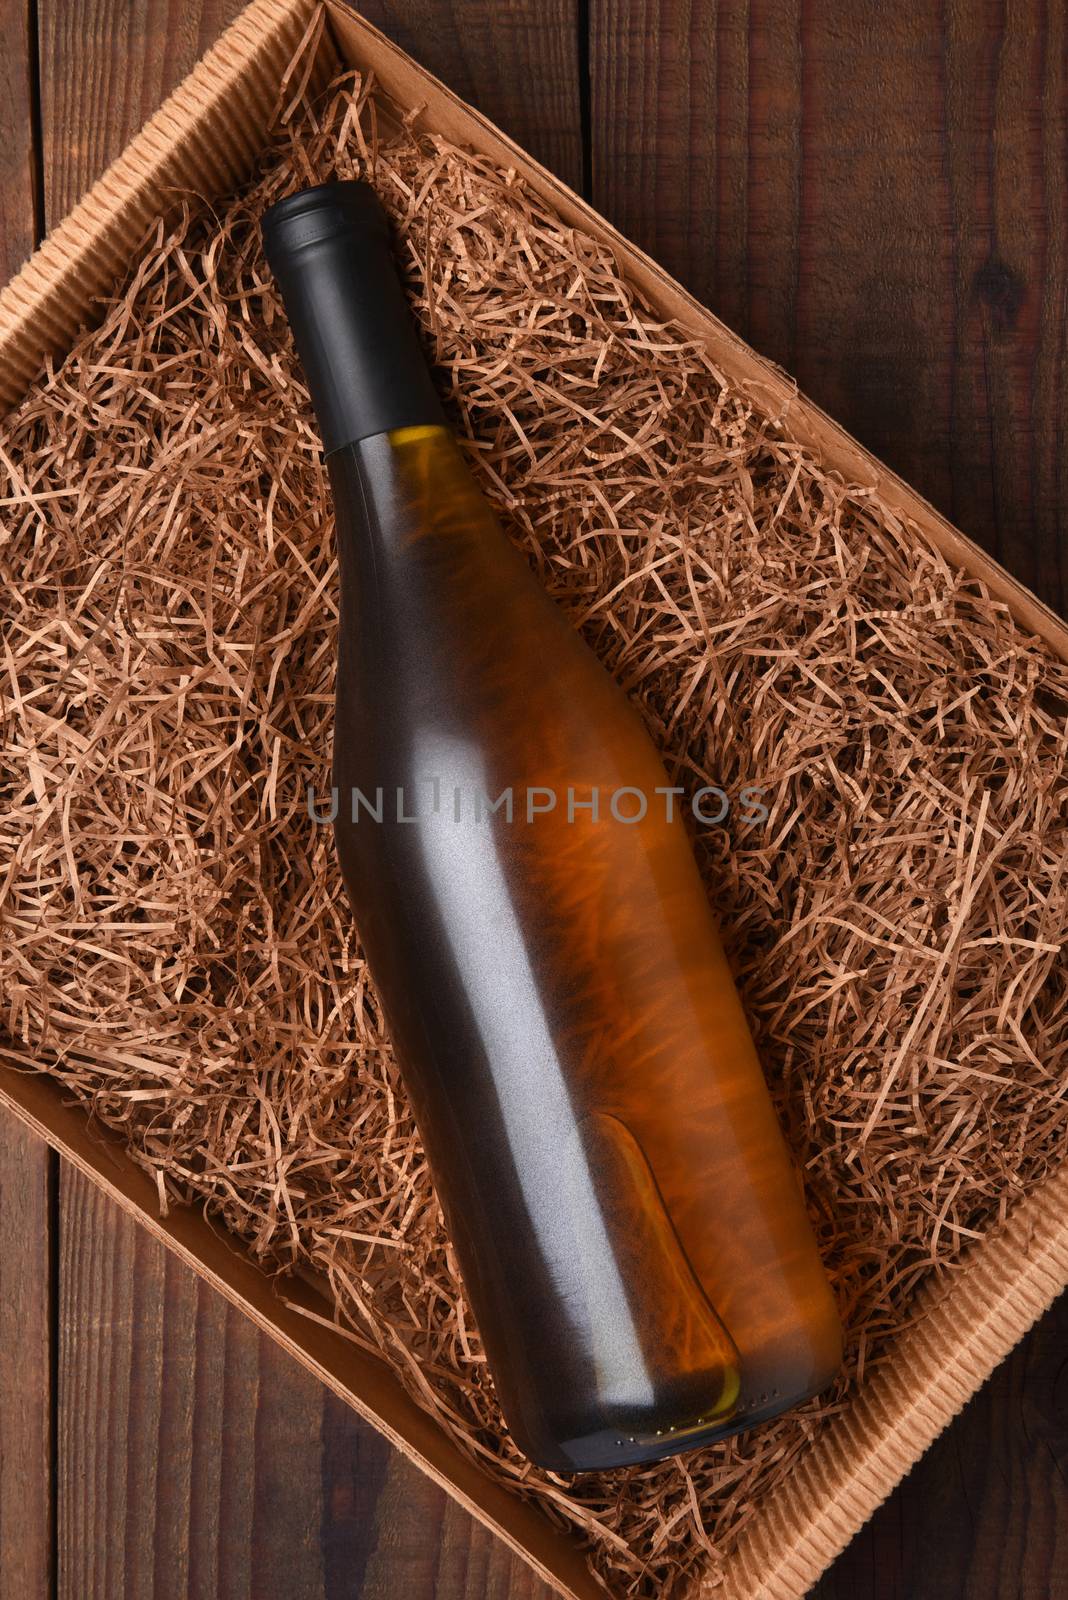 Chardonnay Wine Bottle in Packing Straw: High angle shot of a single bottle in a cardboard box with straw packing.